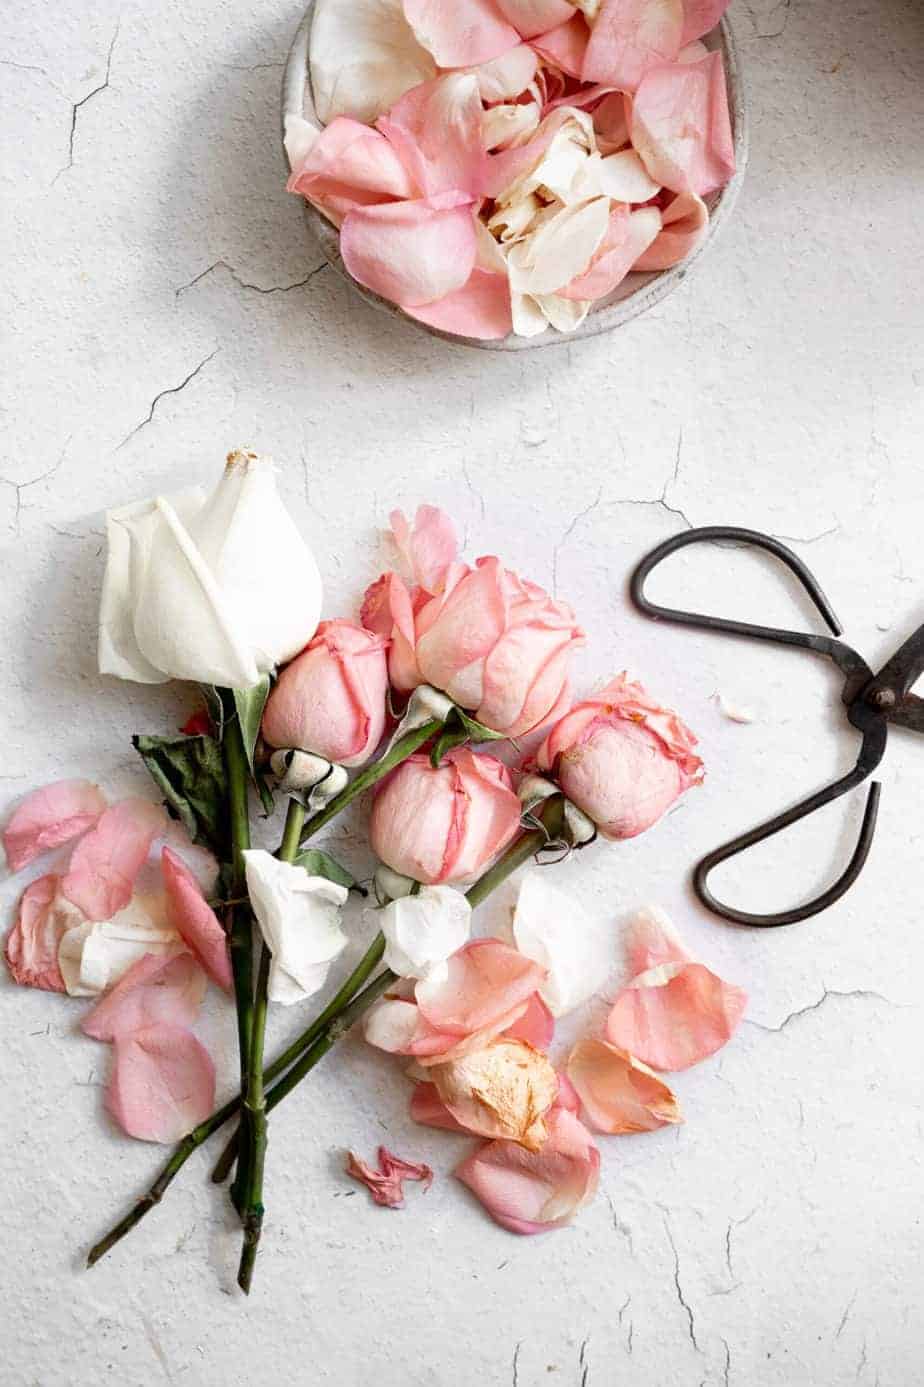 fresh rose petals being picked and placed in a bowl for making rose water